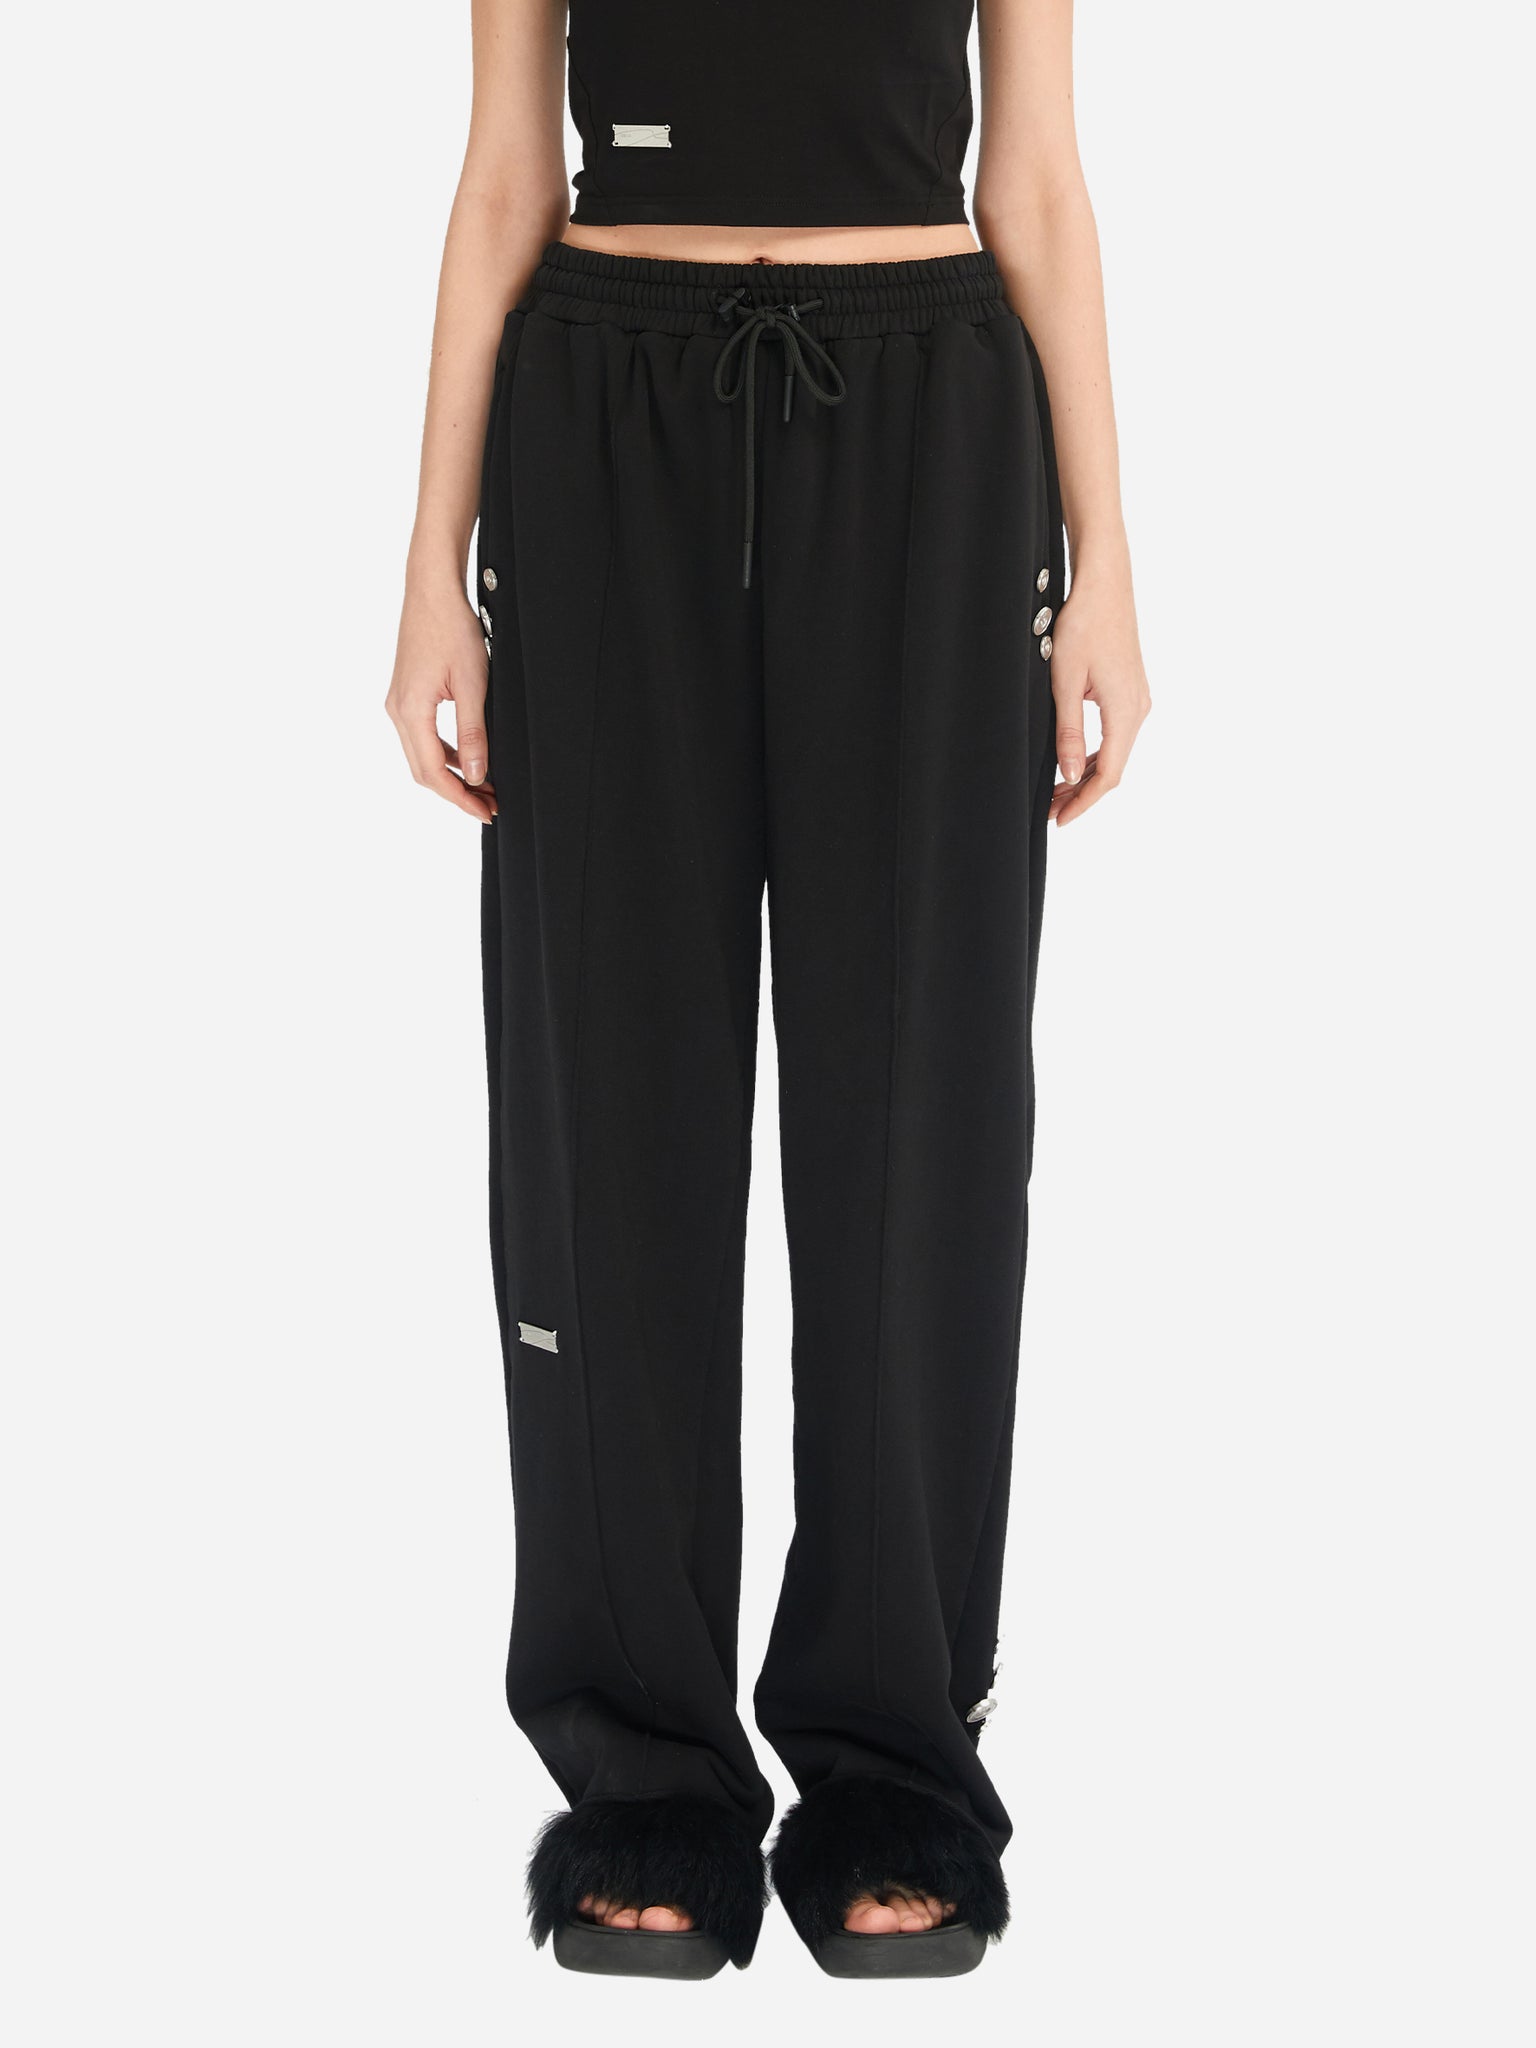 Buy Calvin Klein Jeans Straight Fit Relaxed Track Pants - NNNOW.com